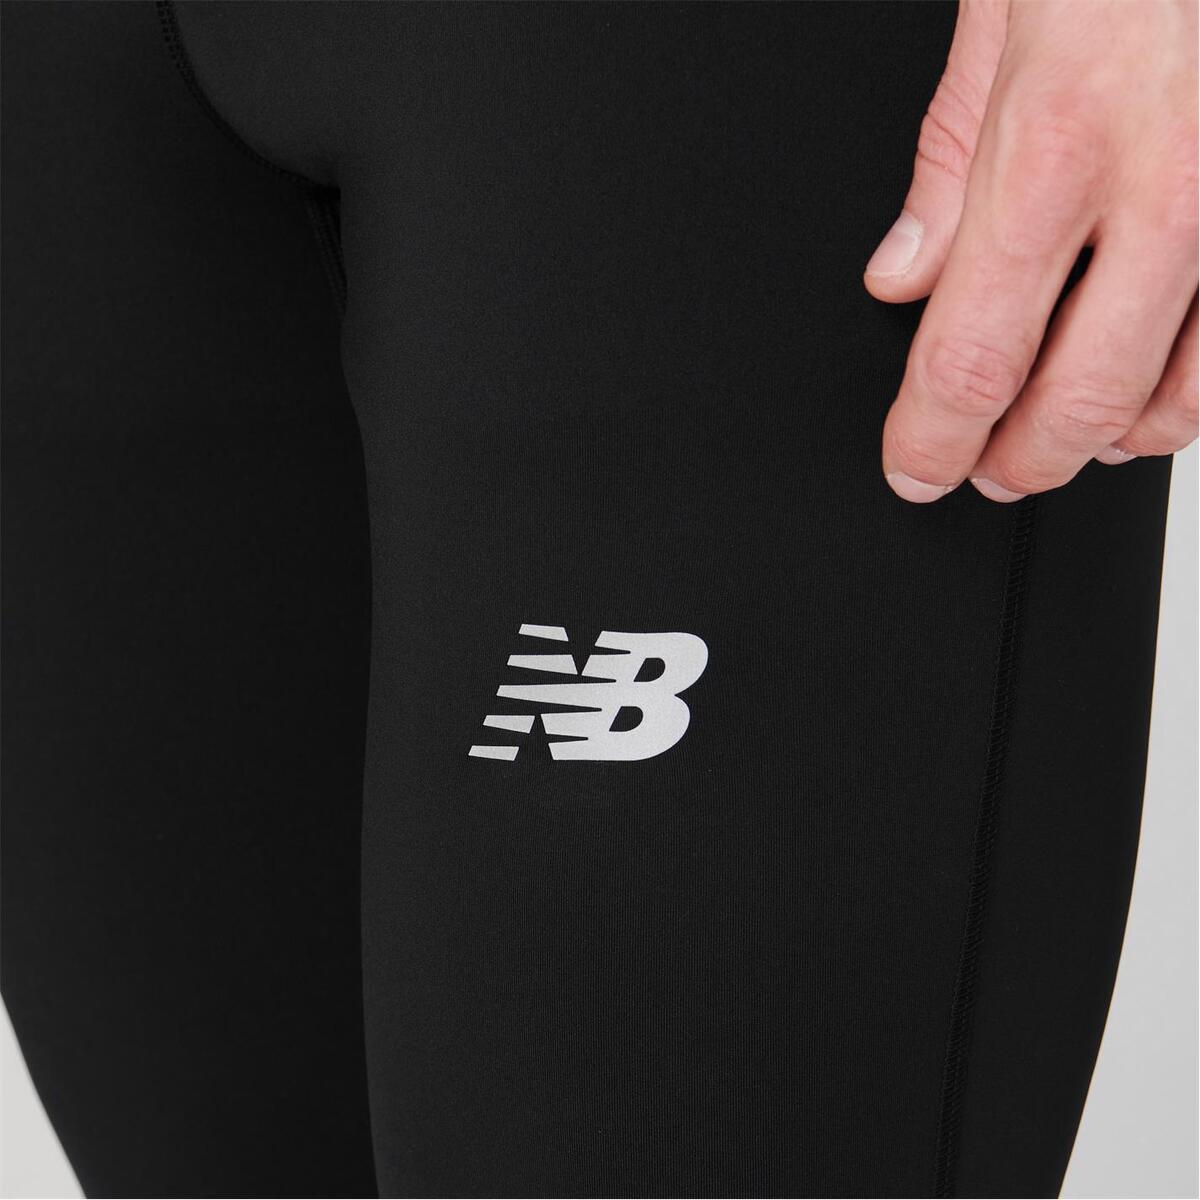 New Balance Running Tights Mens Gents Performance Pants Trousers Bottoms